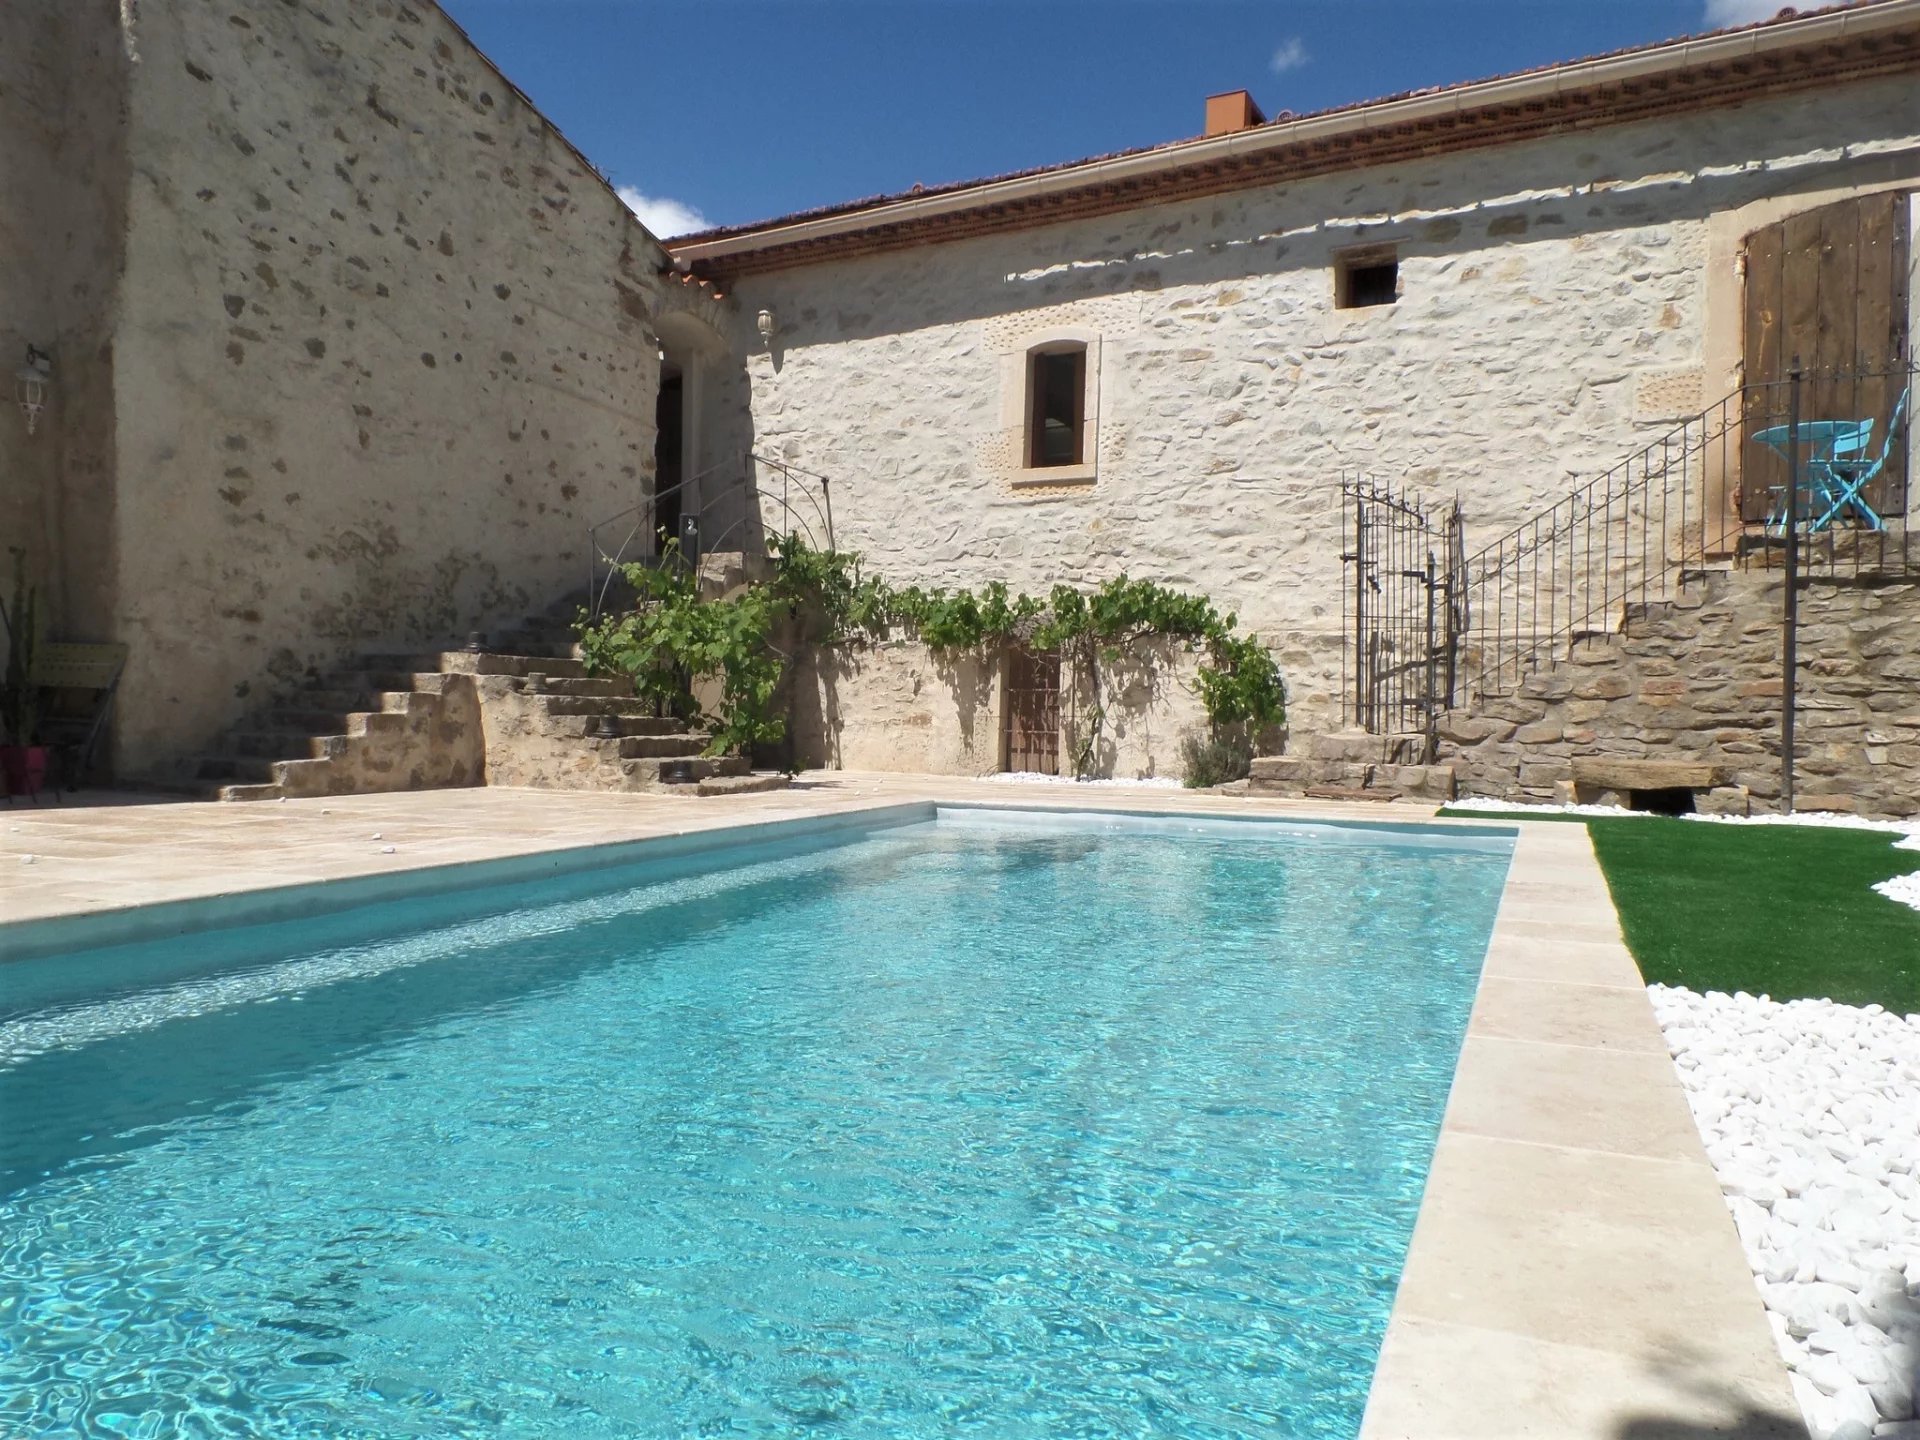 ATYPICAL STONE COUNTRY HOUSE WITH POOL AND GARDEN, GINESTAS